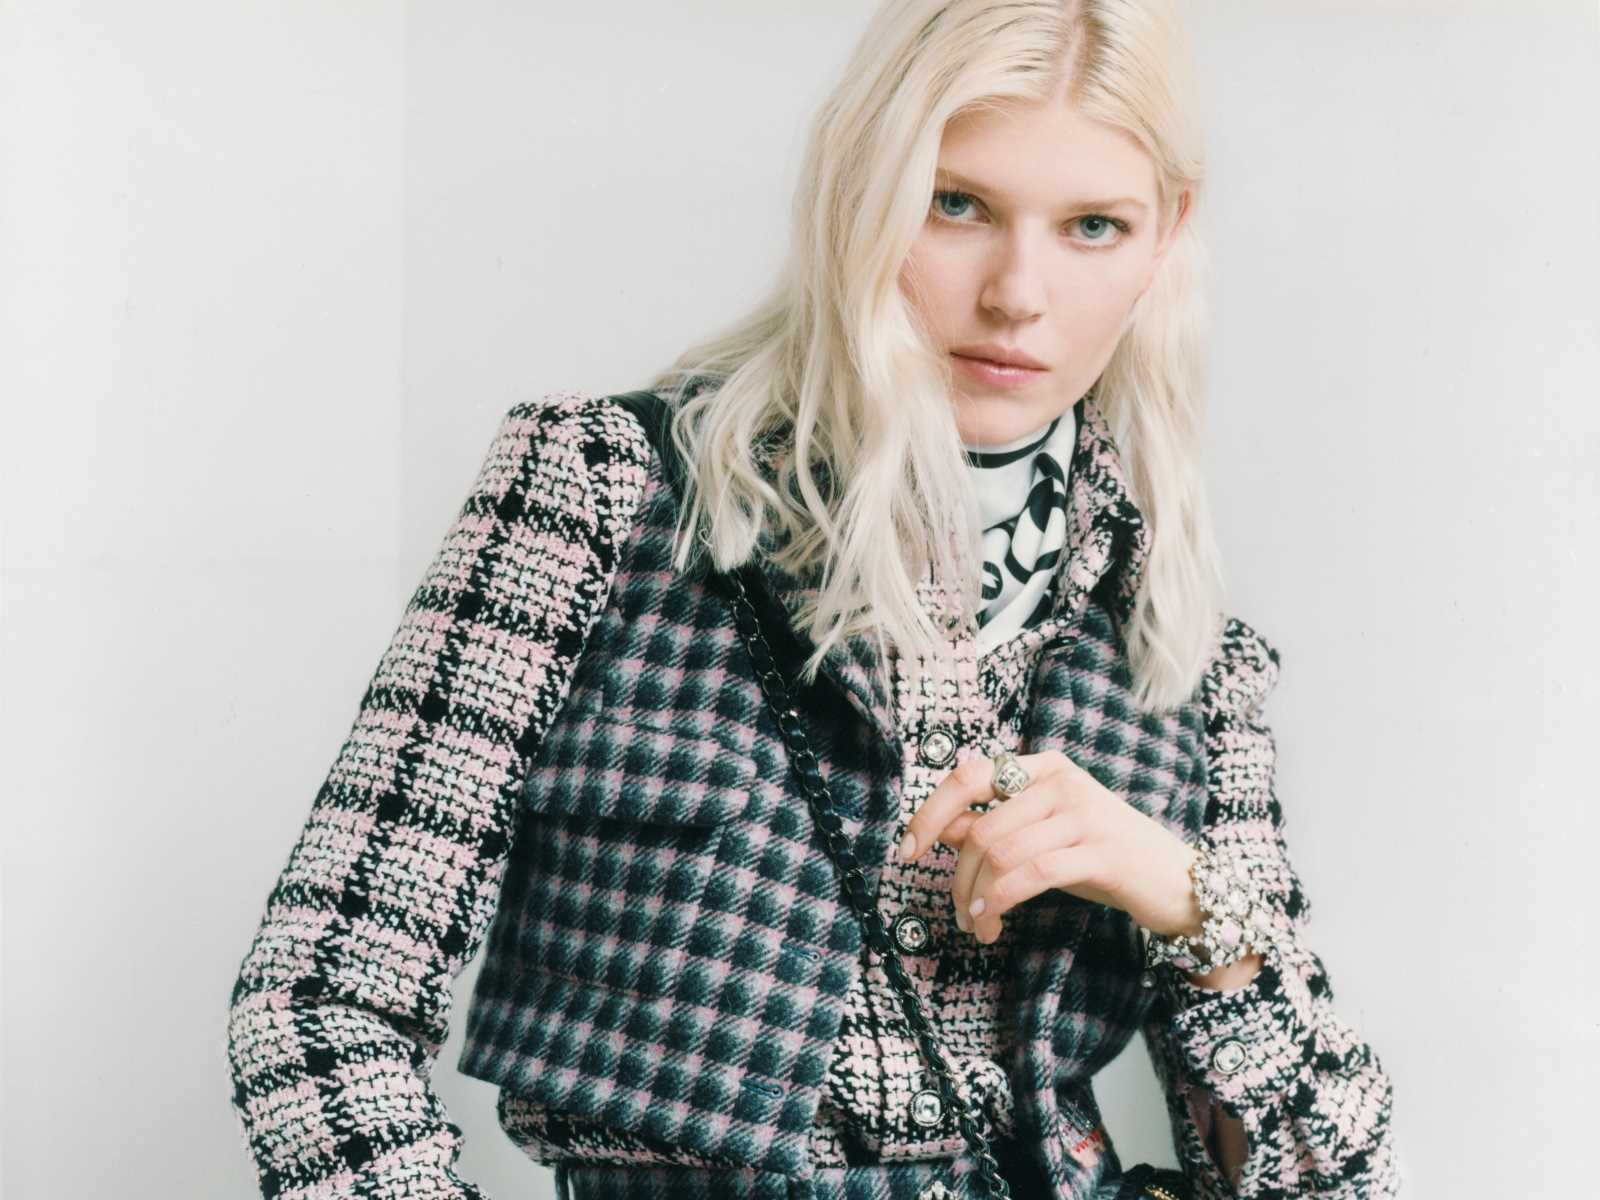 CHANEL - Model and friend of the House Ola Rudnicka is the